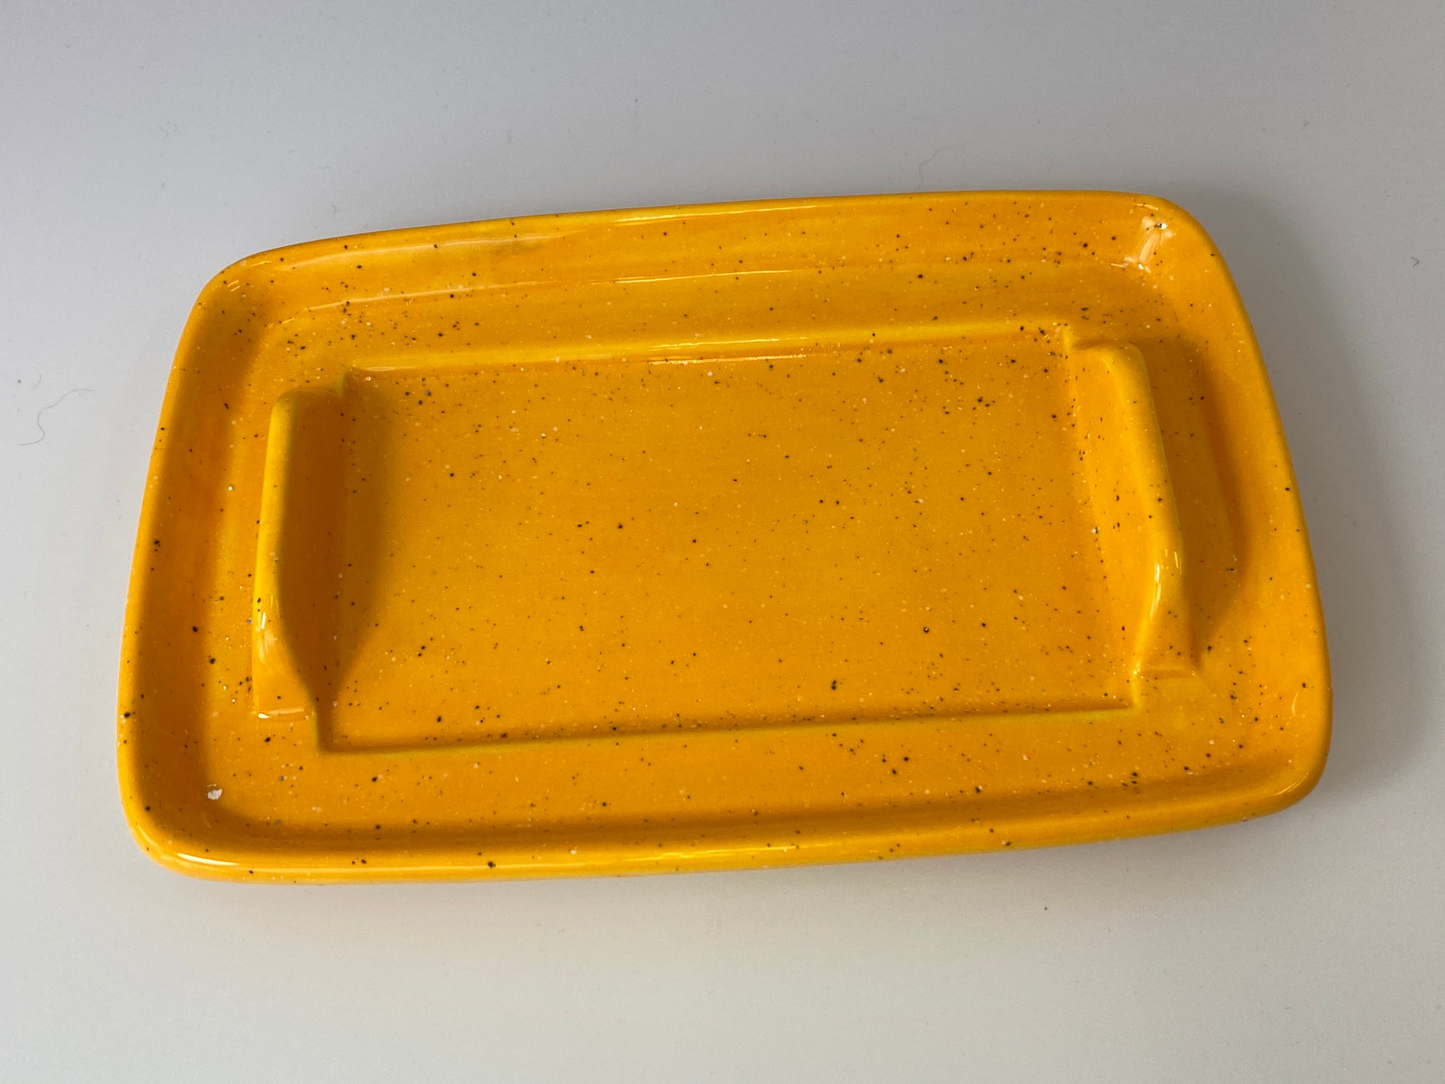 Butter Dish with White Lid Yellow Spots